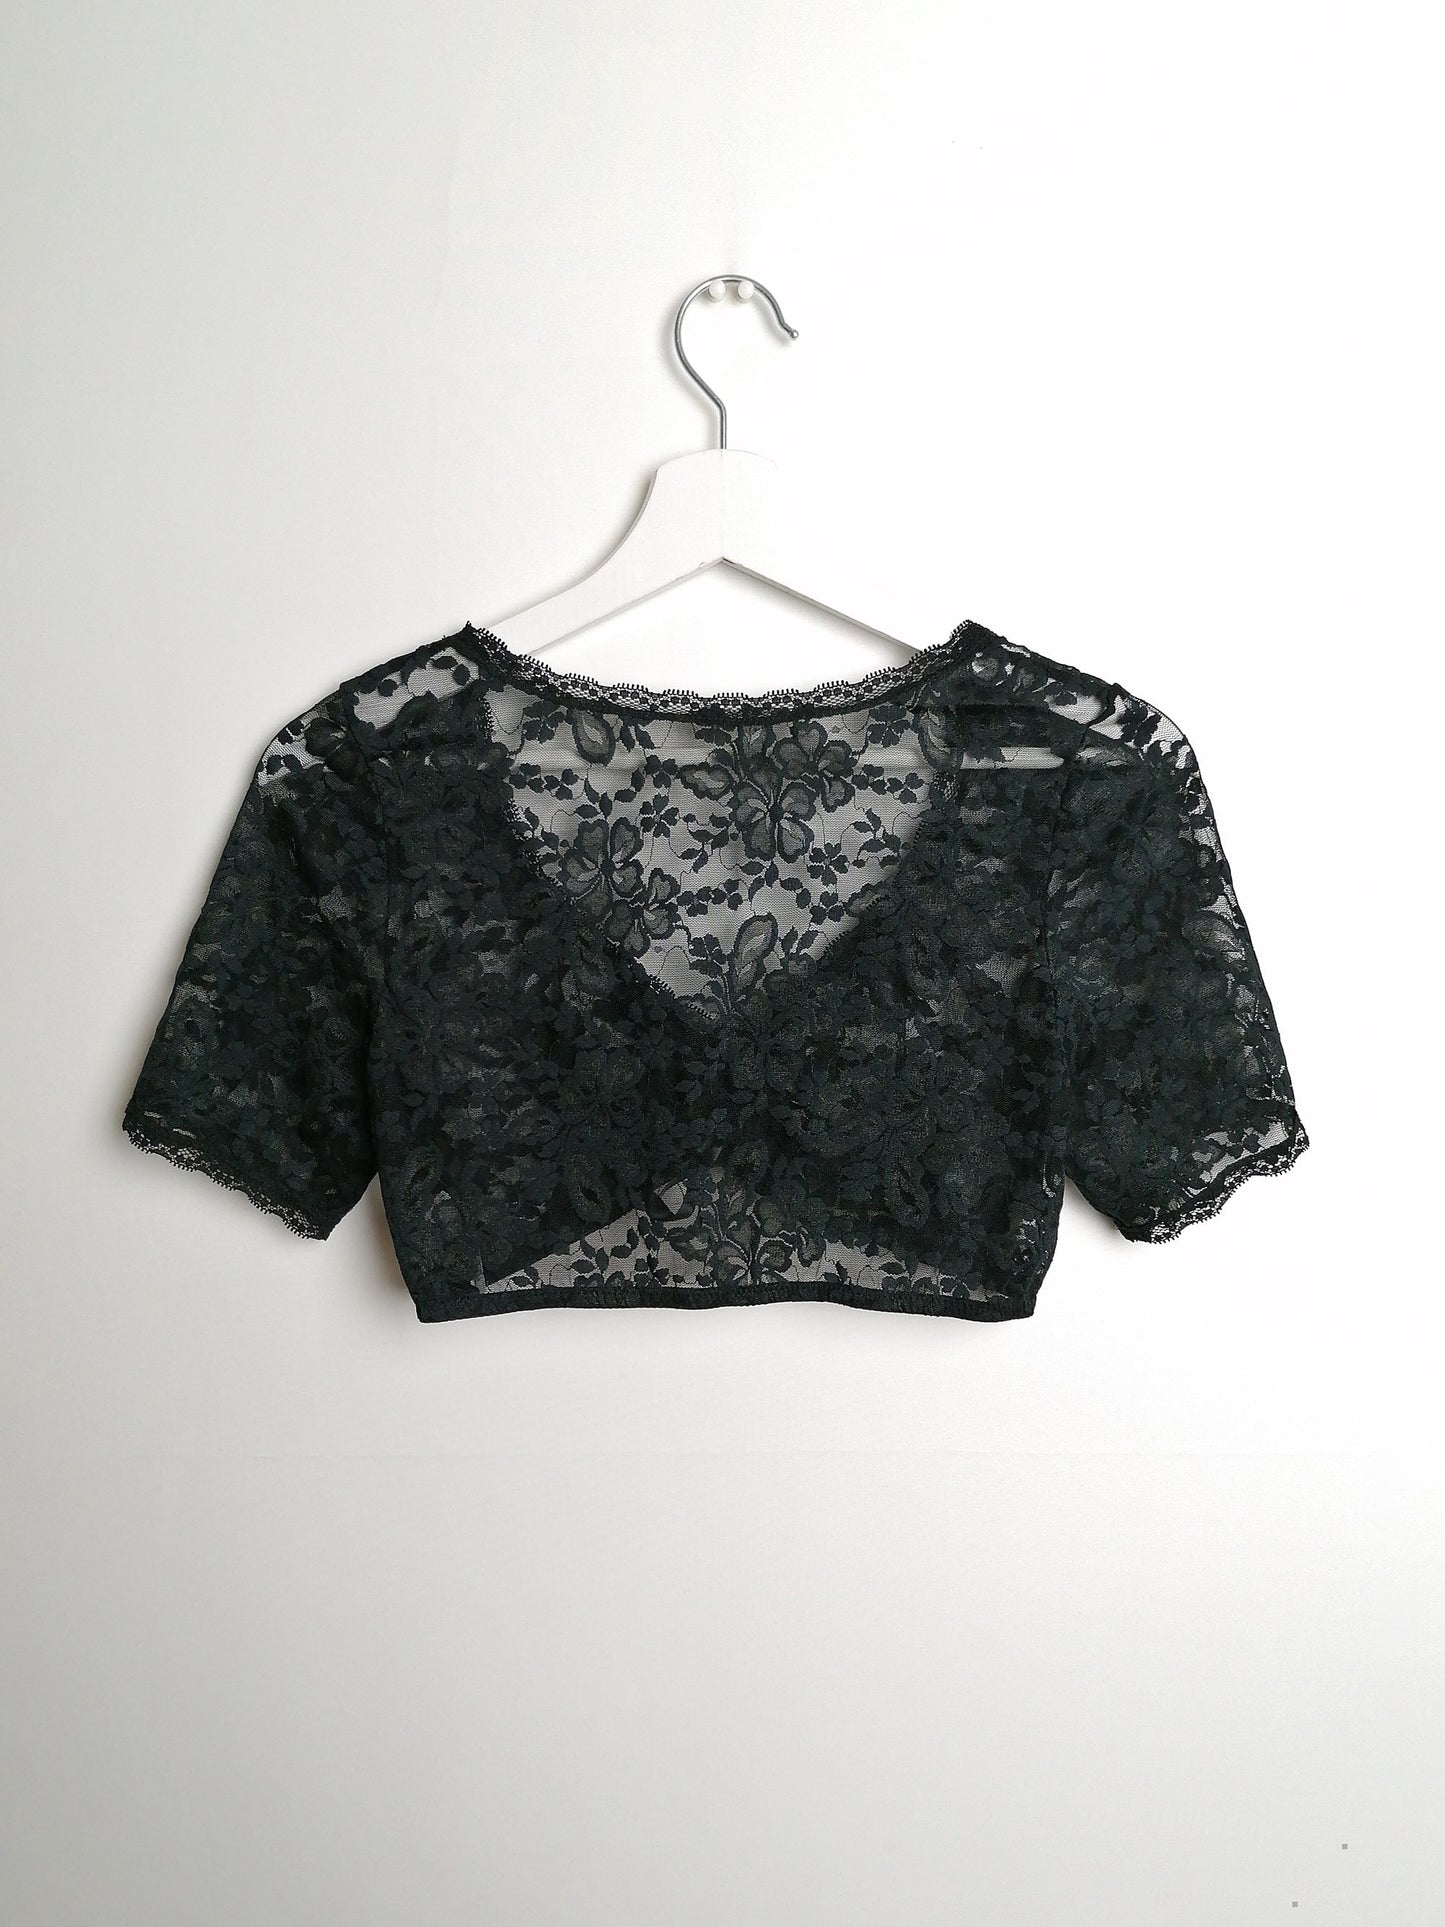 Micro Crop Top Lace Black - size XS-S